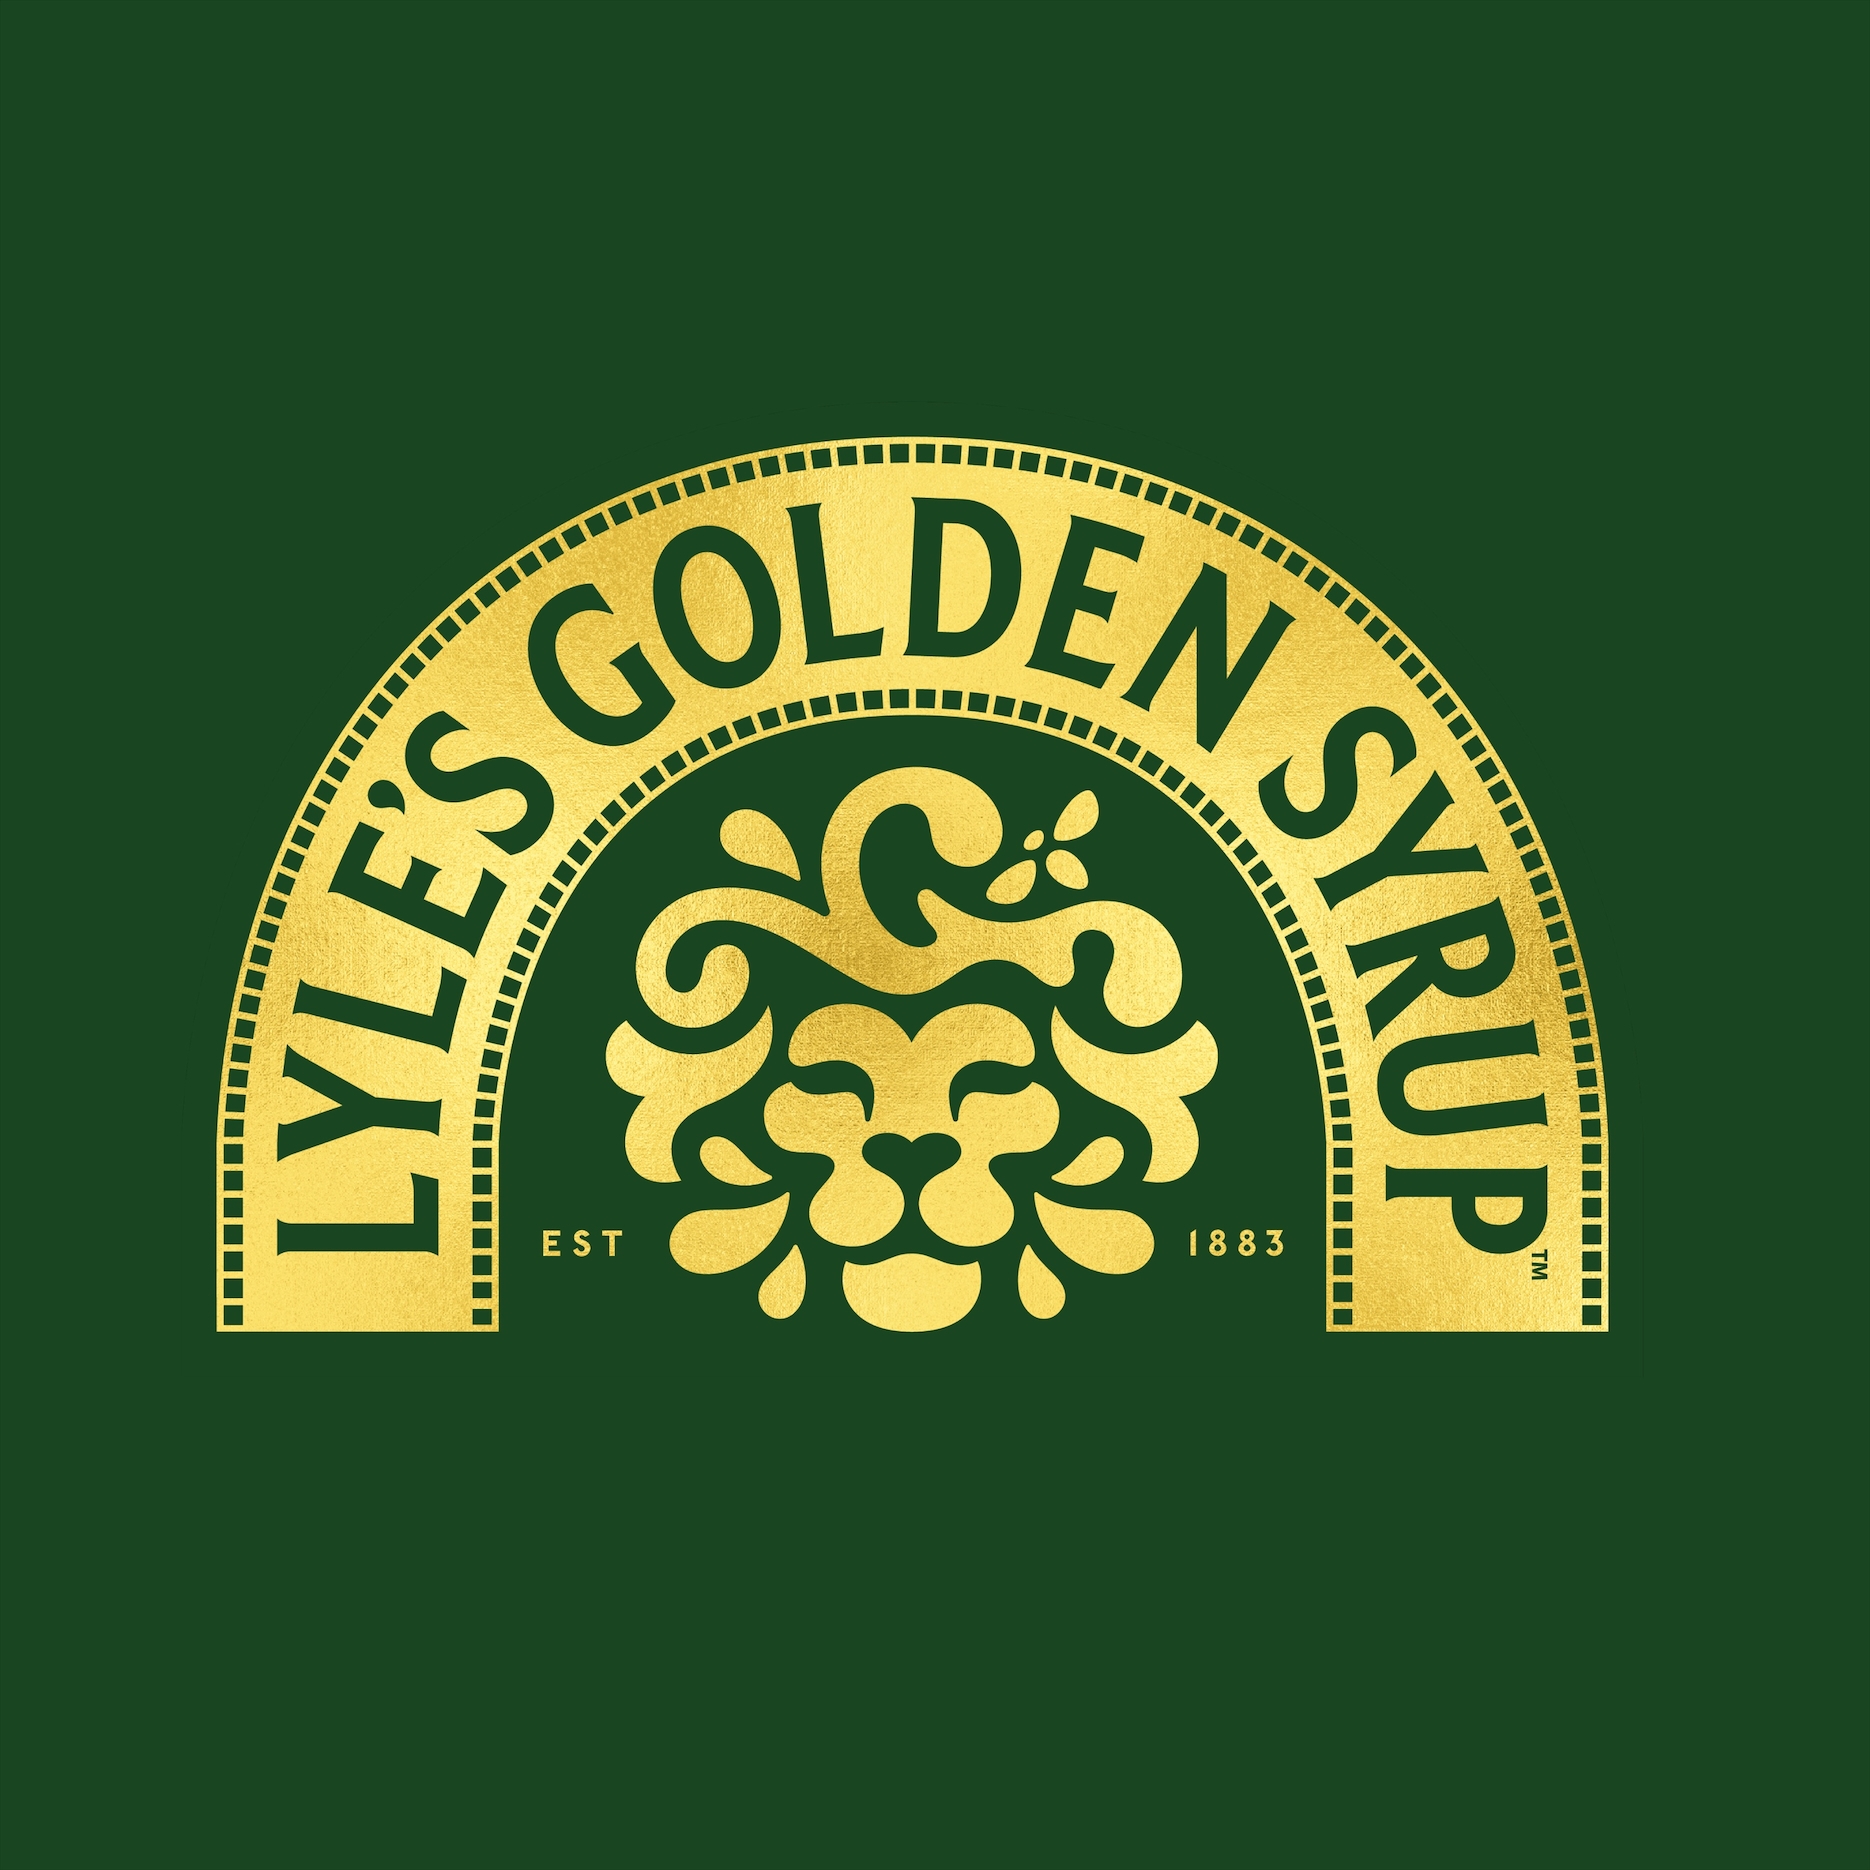 Lyle's Golden Syrup Logo Redesign: A Shift from Traditional to Modern Branding